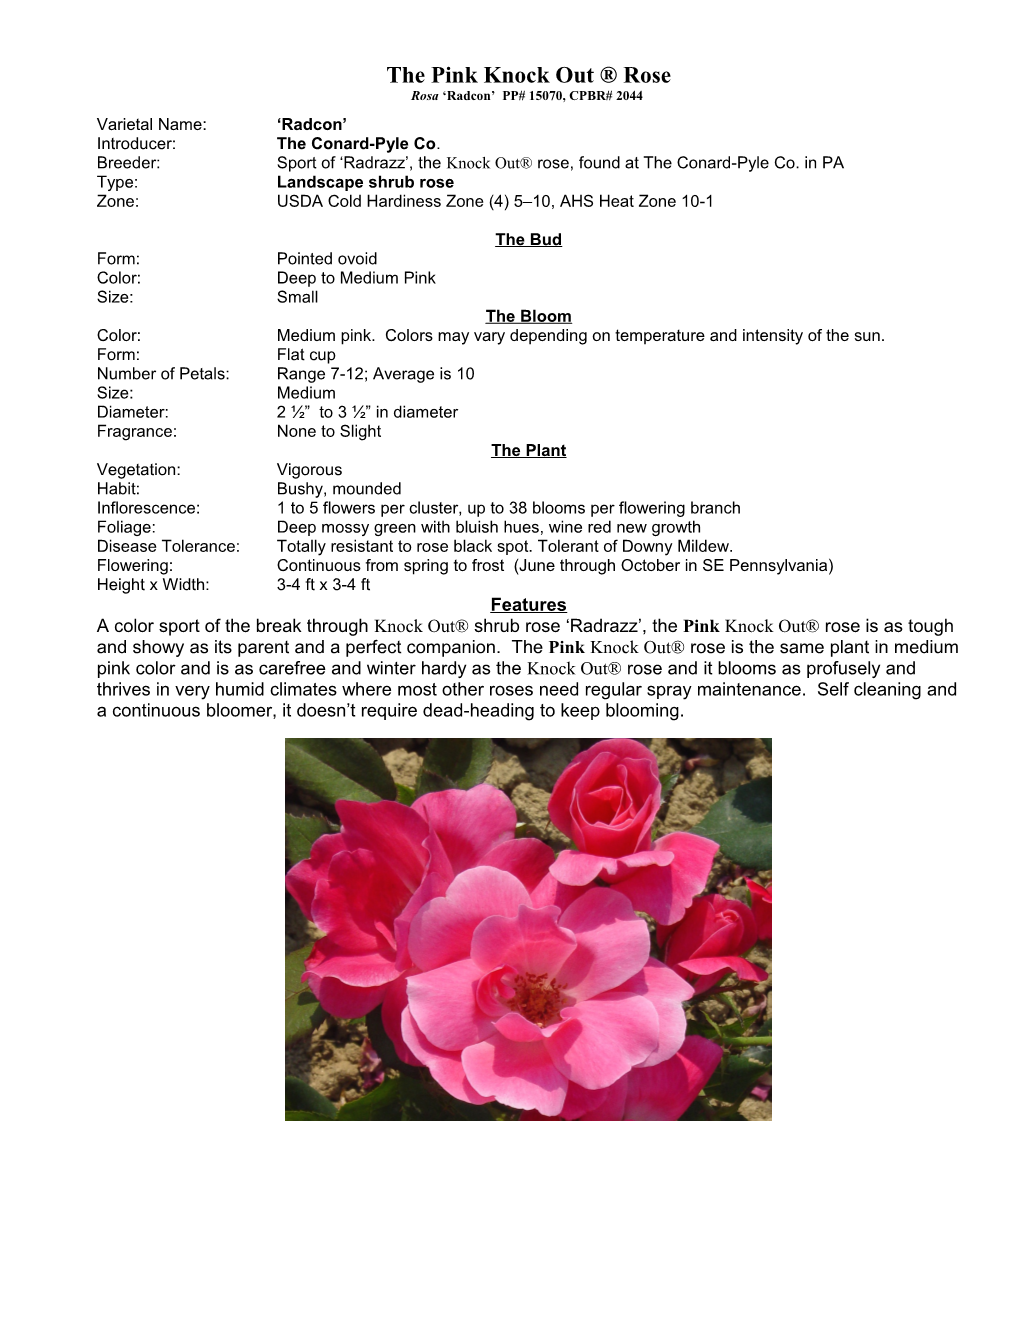 The Pink Knock out Rose